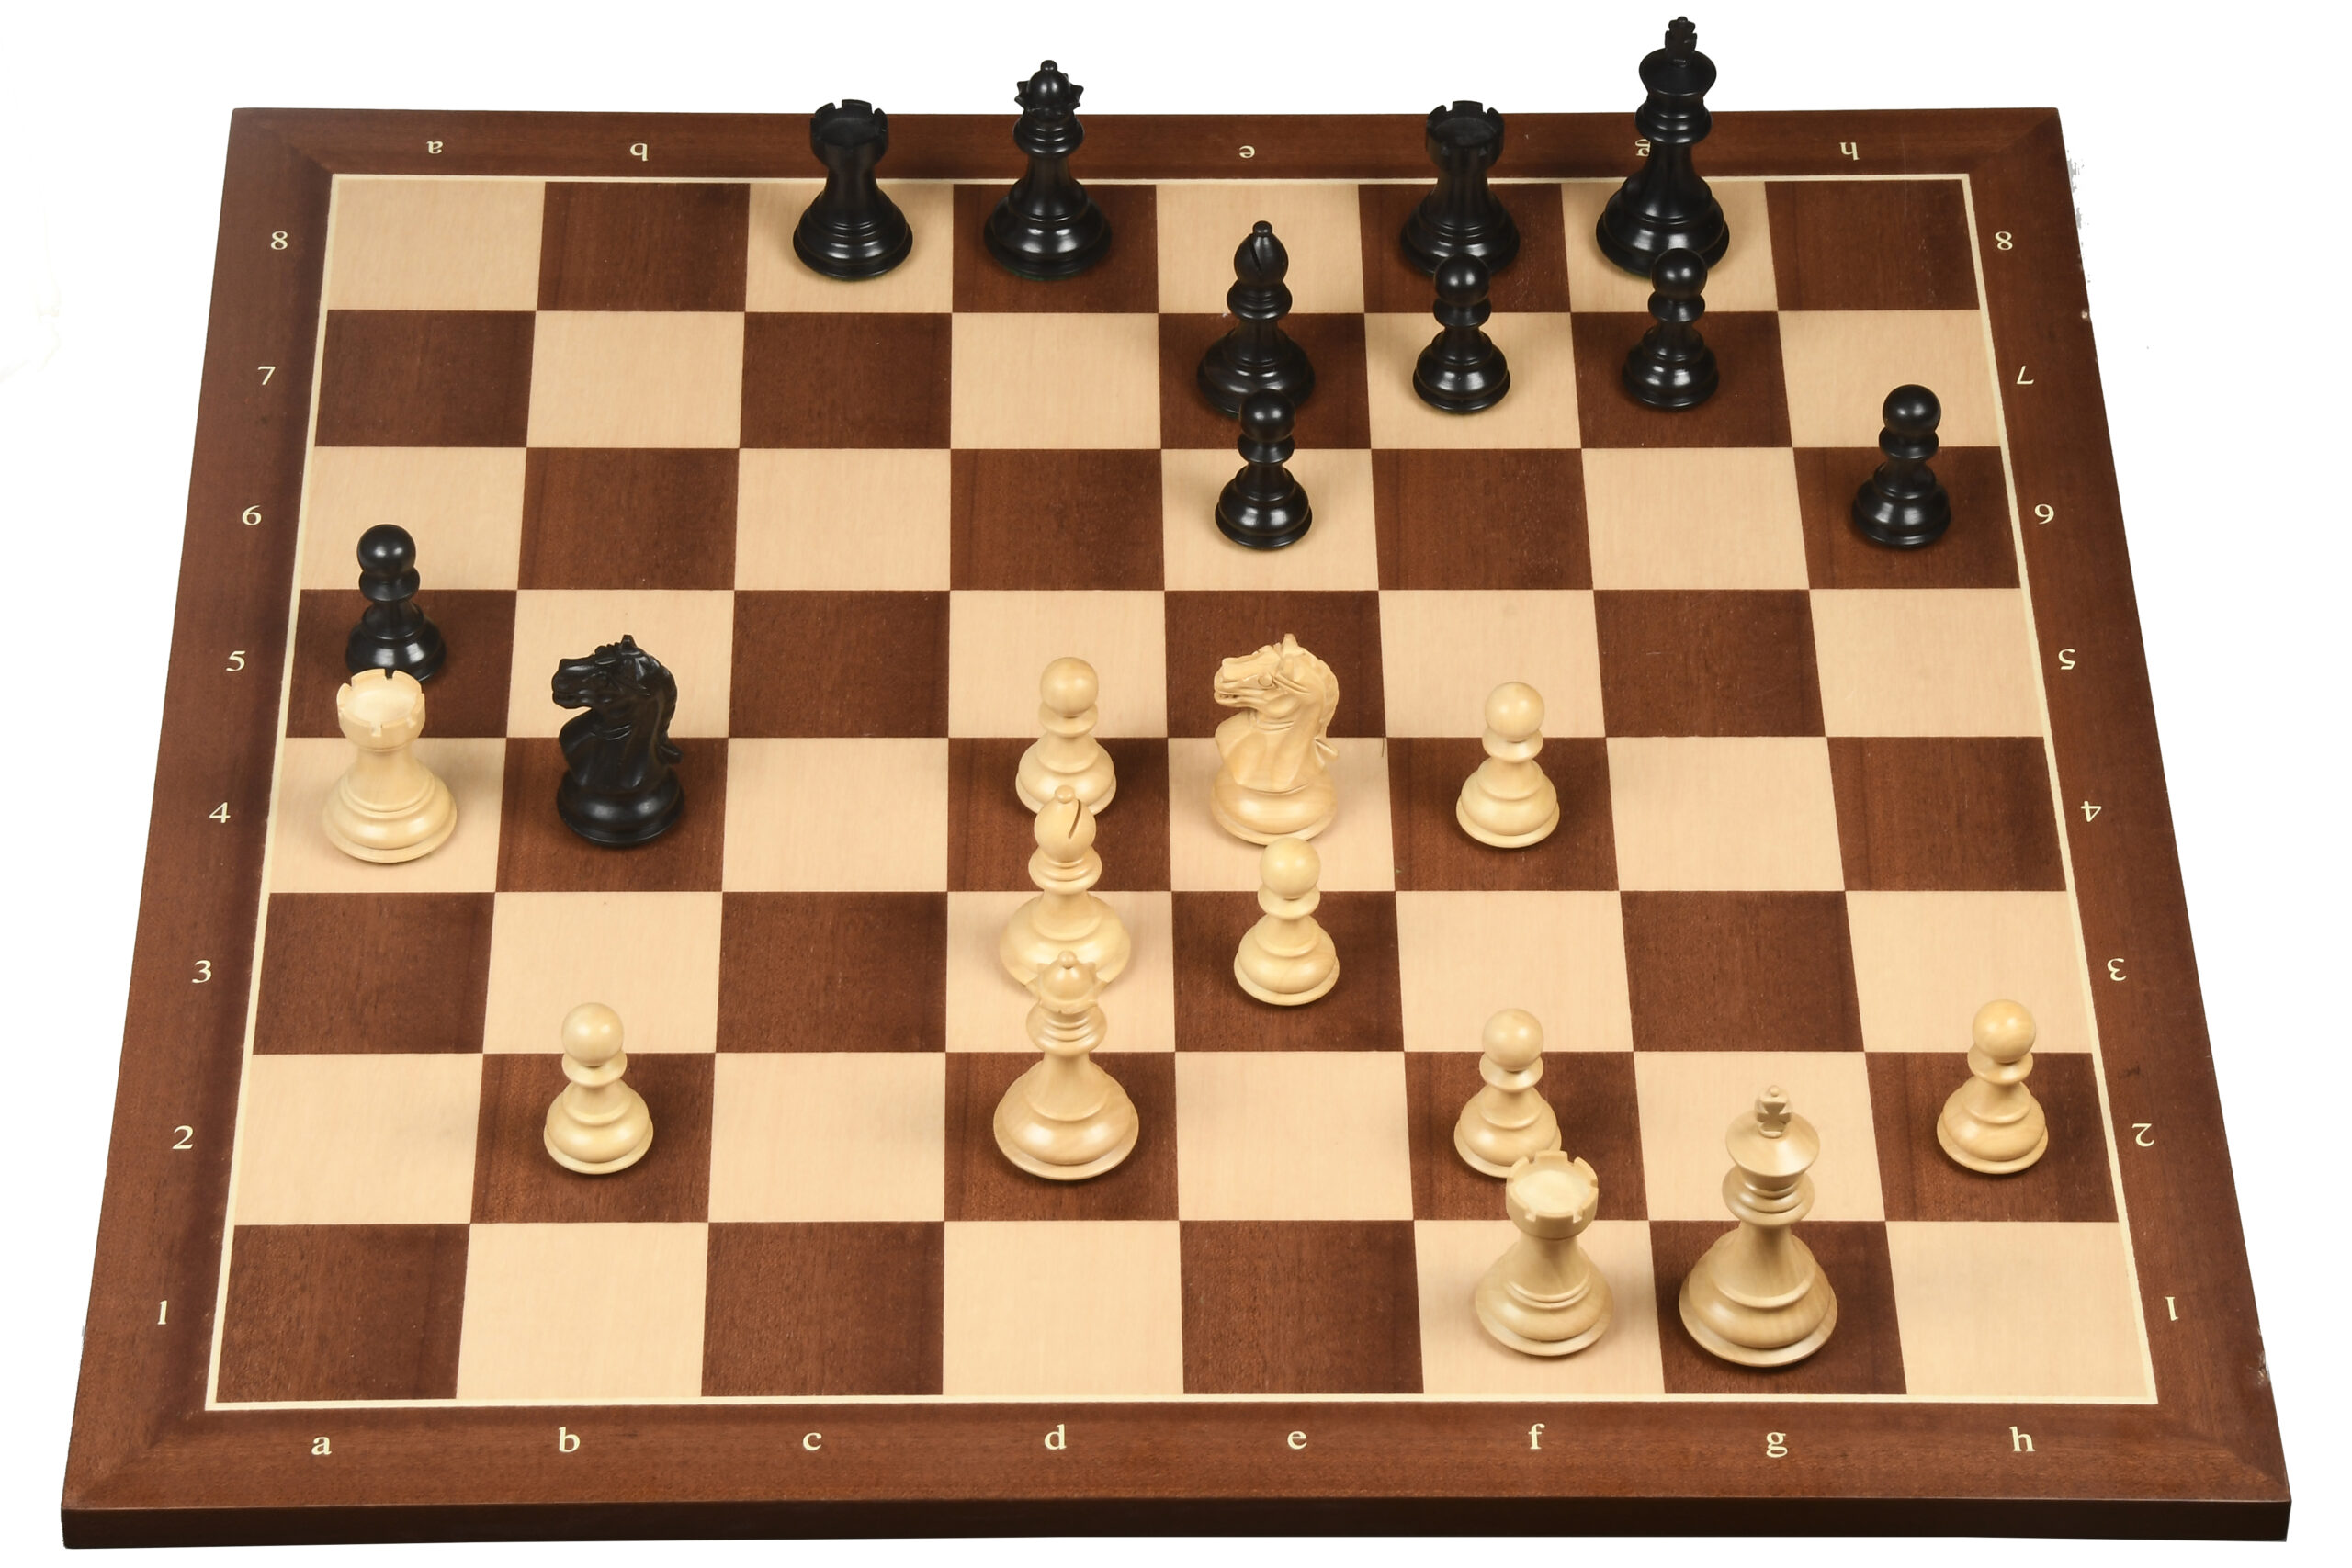 Suggested Chess Opening For Beginners